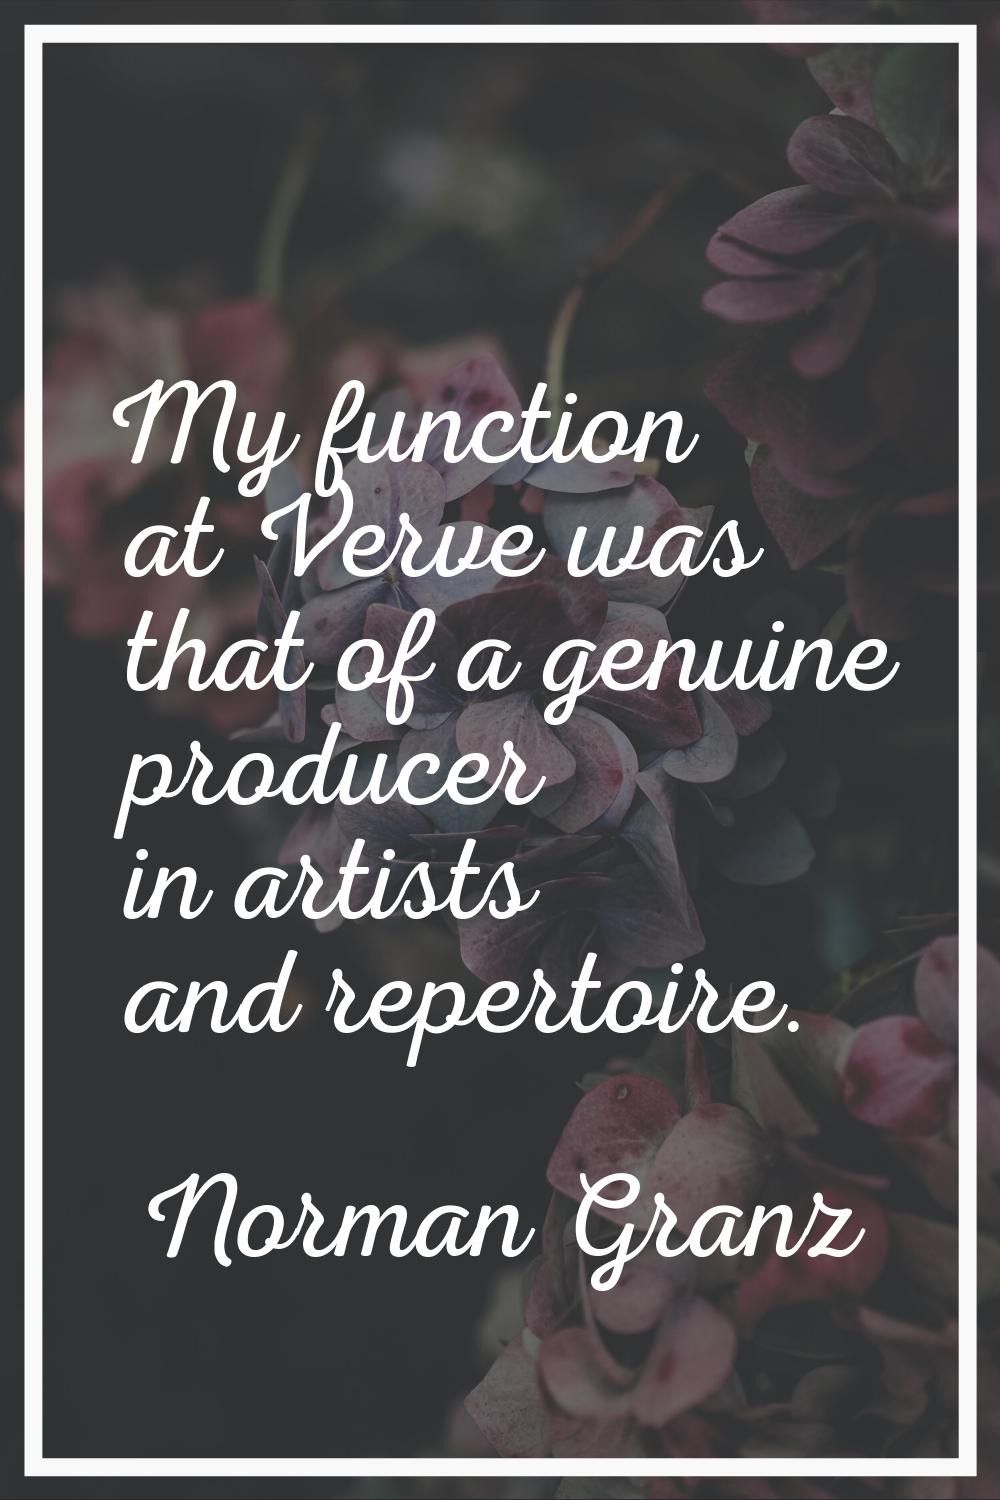 My function at Verve was that of a genuine producer in artists and repertoire.